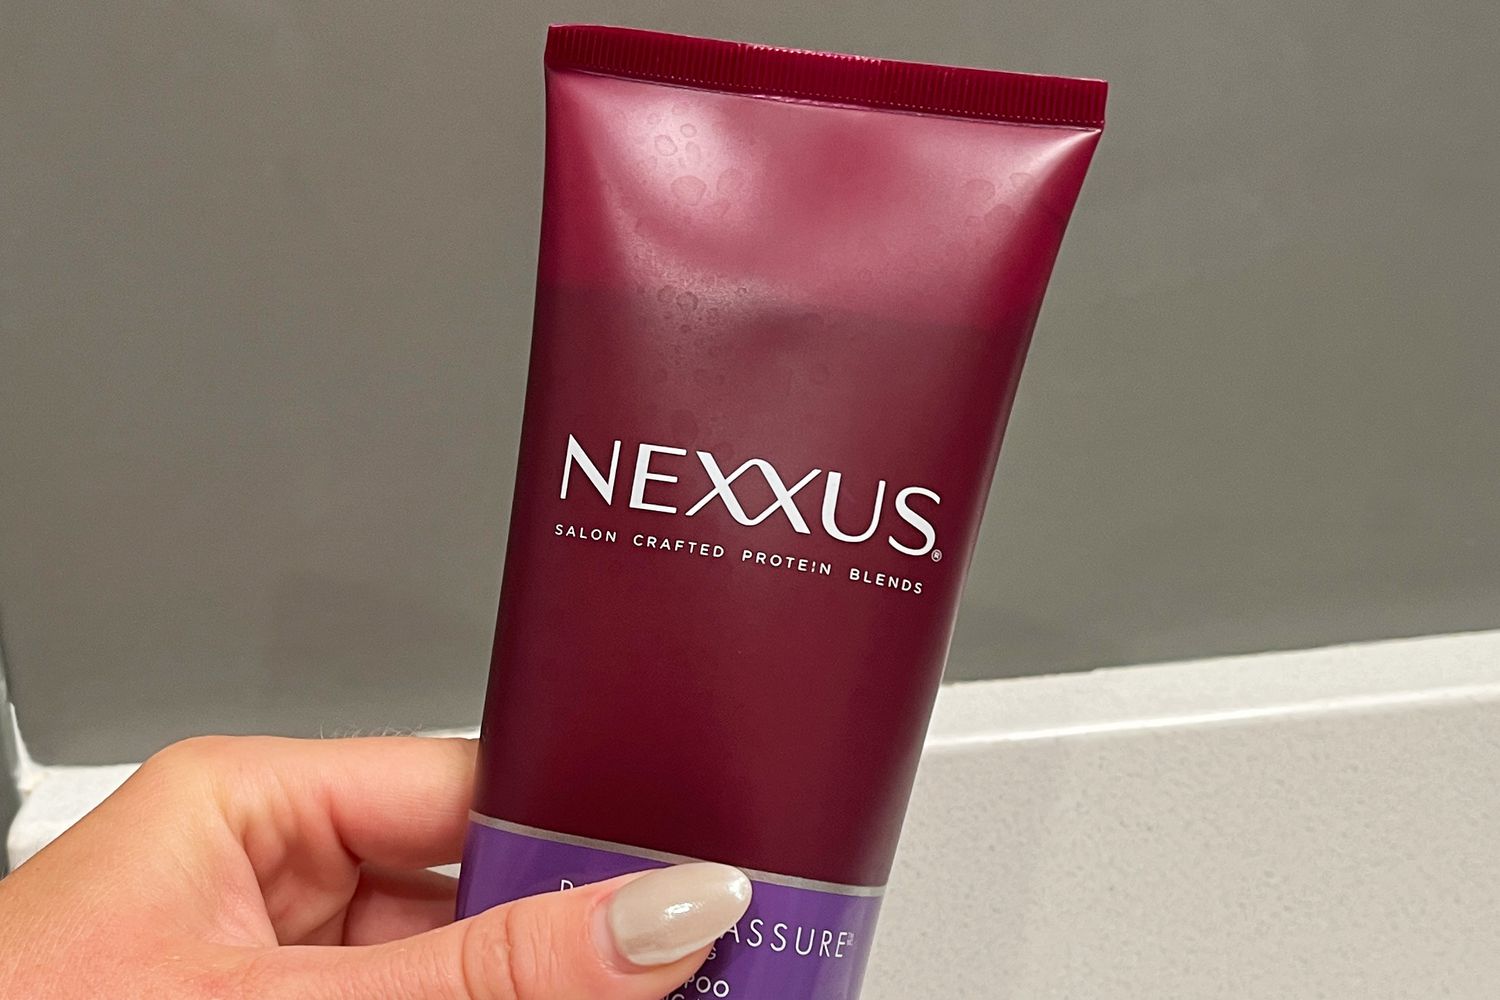 Hand holding a tube of Nexxus Blonde Assure Color Toning Shampoo